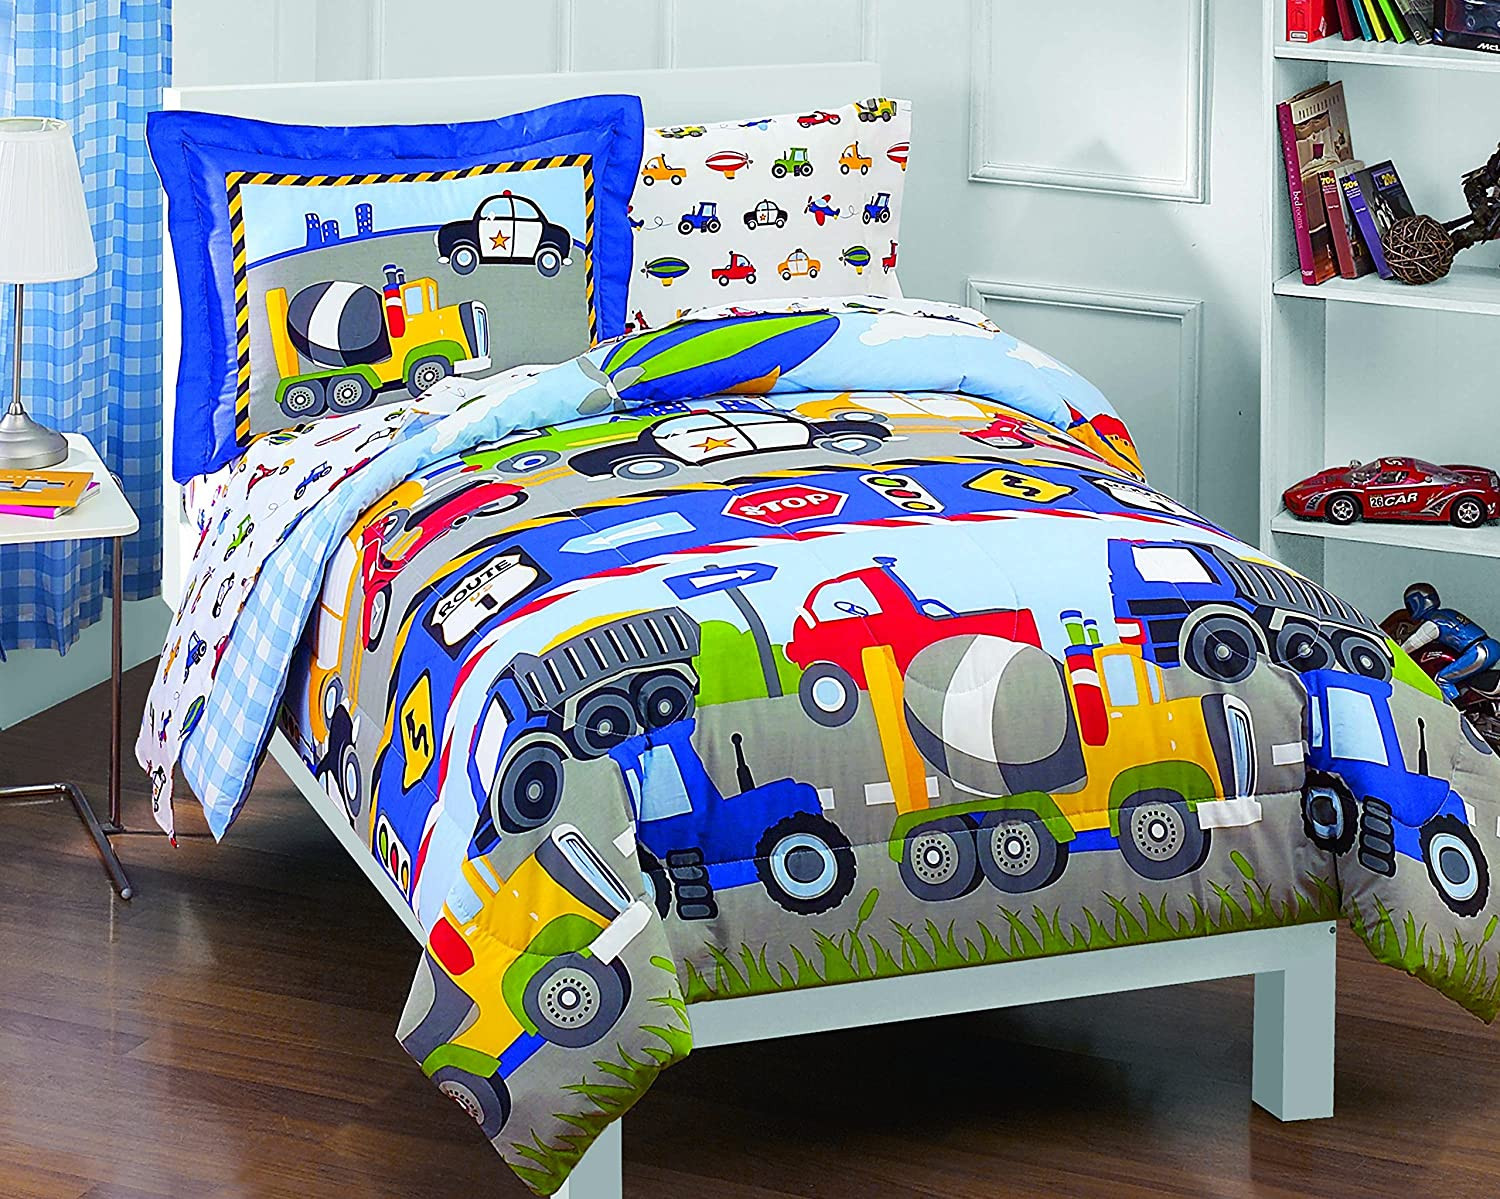 Toddler Bedroom Sets For Boys
 Kids Boys and Teen Bedding Sets – Ease Bedding with Style